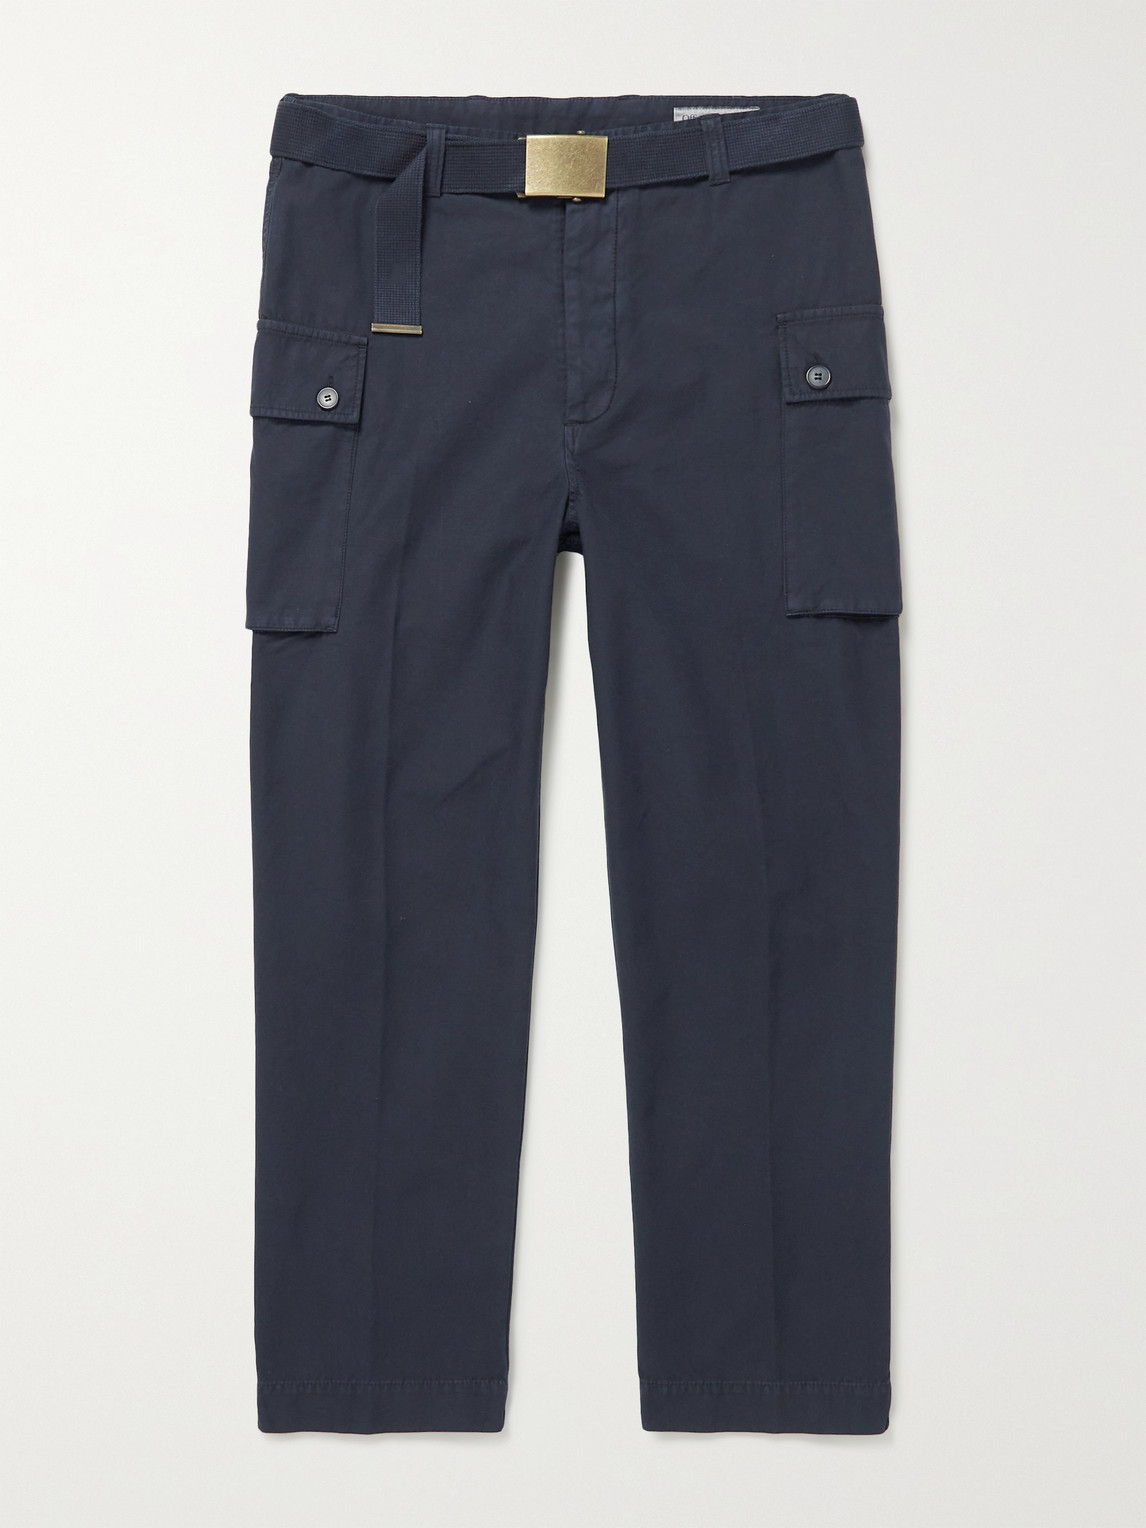 OFFICINE GENERALE MAXENCE BELTED GARMENT-DYED COTTON CARGO TROUSERS